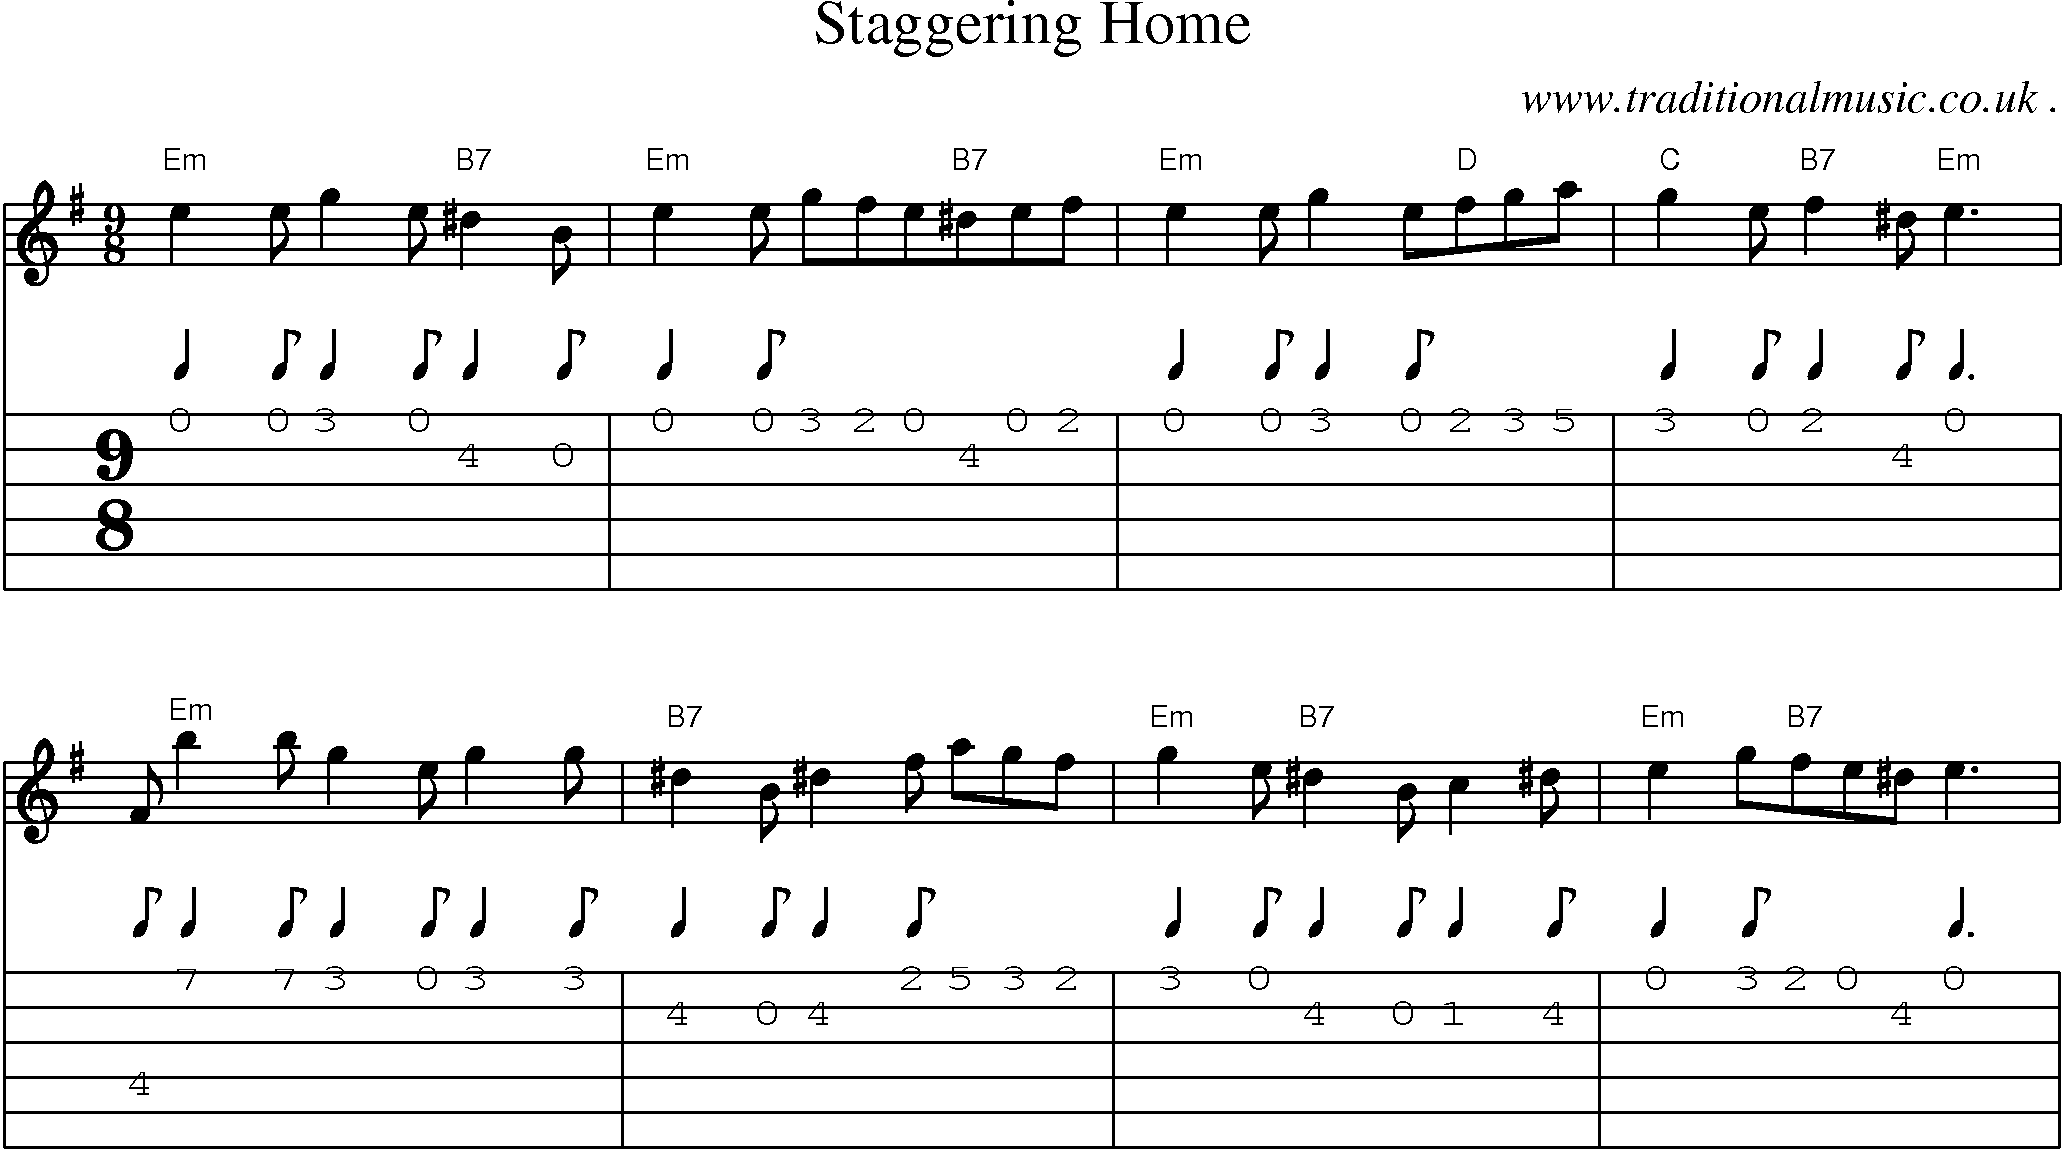 Sheet-Music and Guitar Tabs for Staggering Home